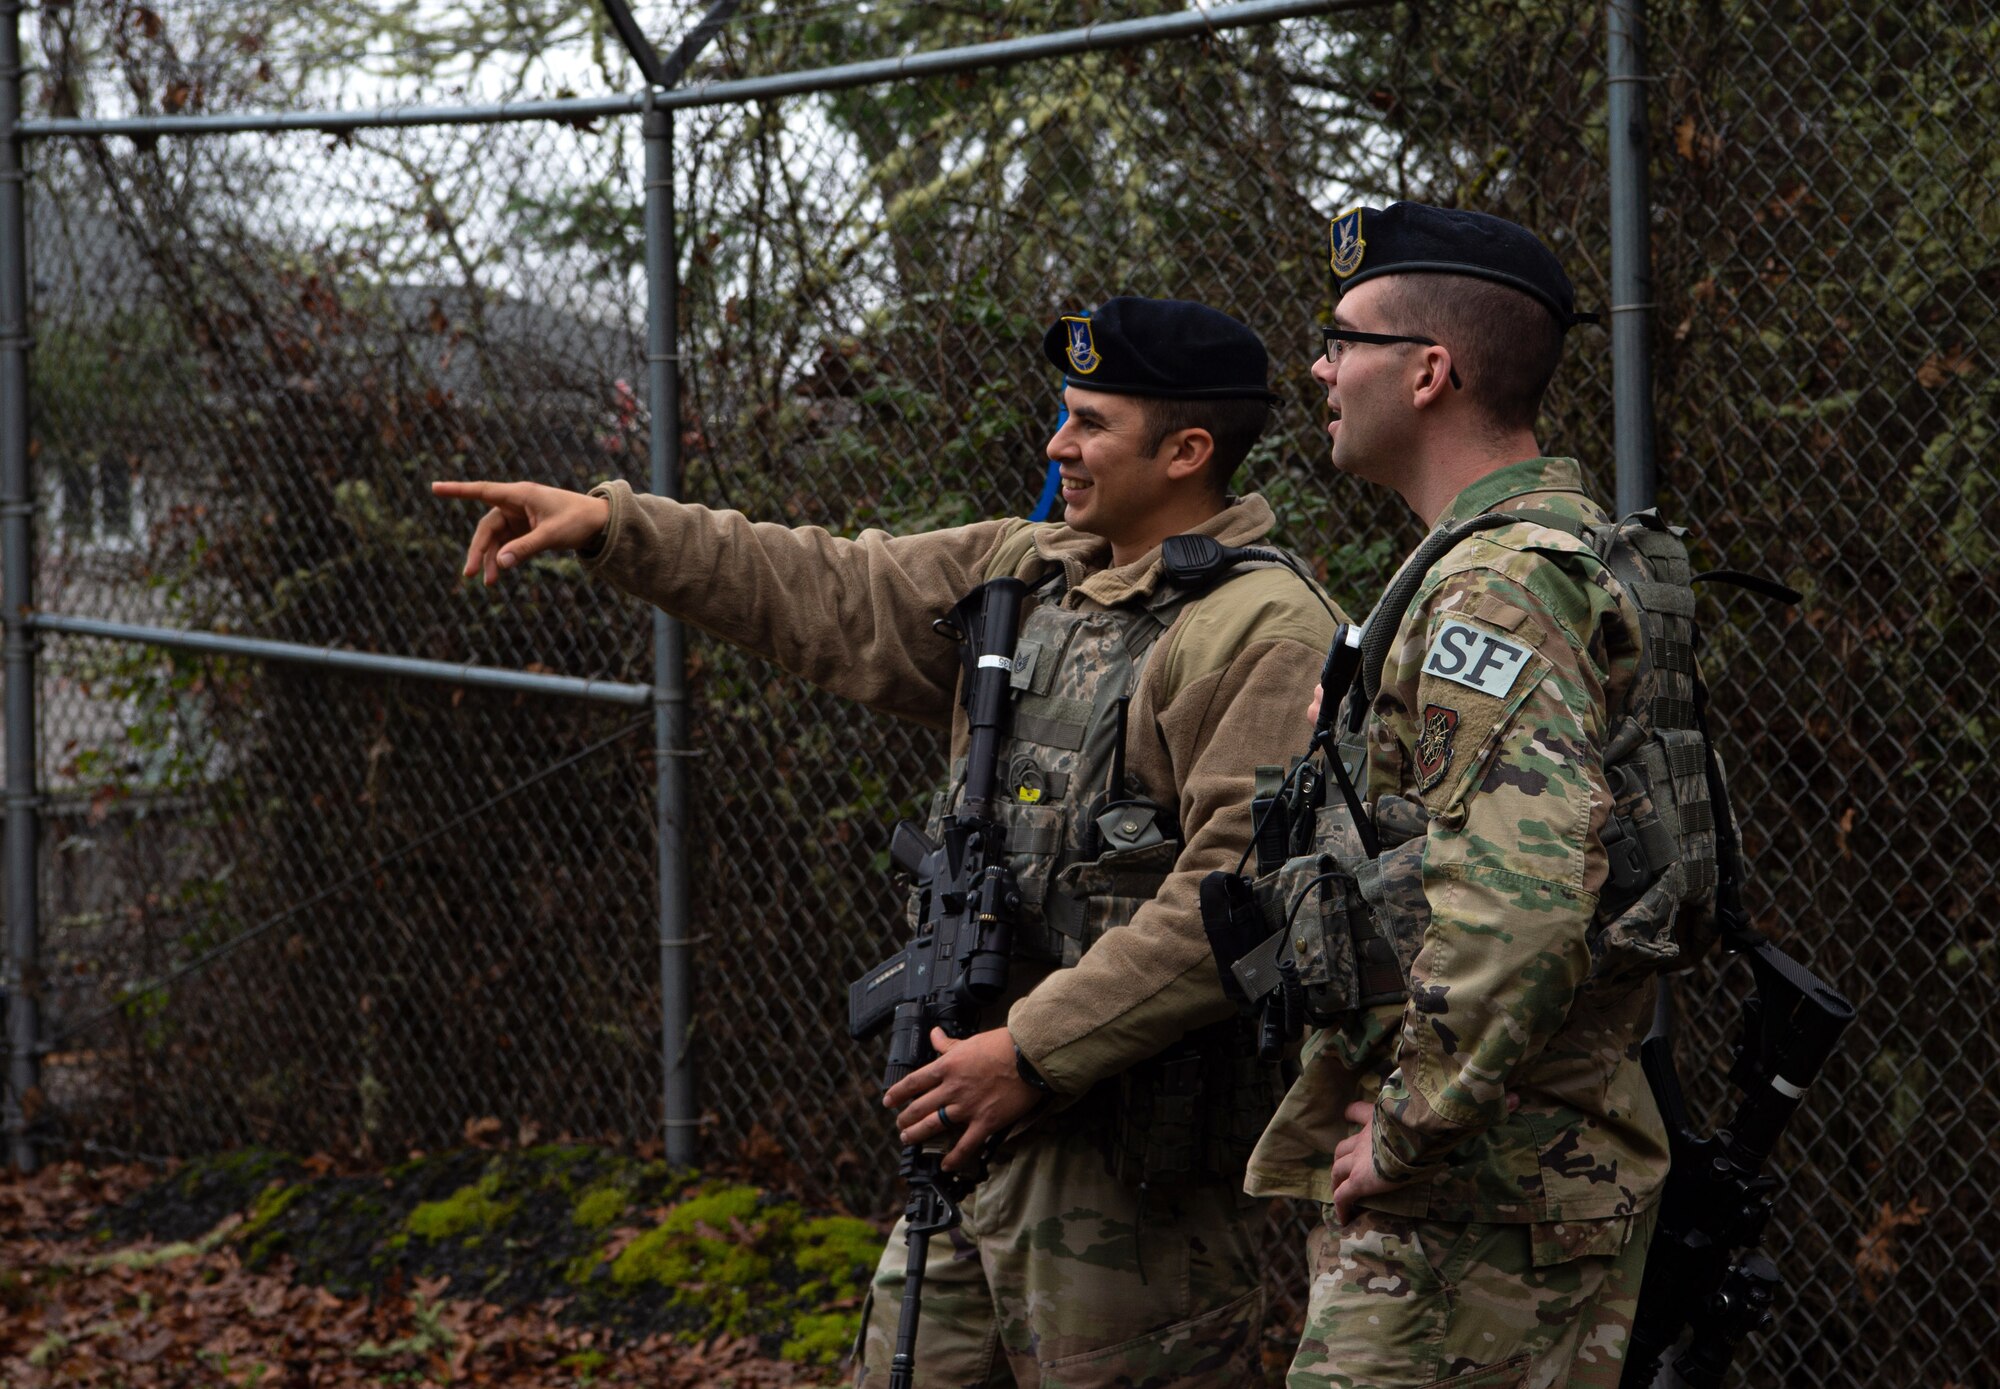 Tech. Sgt. Jesse Reyes, 627th Security Forces Squadron (SFS) combat arms instructor, points out a place in the flight line fence that needs repairs to a coworker at Joint Base Lewis-McChord, Wash., Dec. 4, 2019. 627th SFS flight line security Airmen patrol the fenceline looking for holes to be patched up by contractors. (U.S. Air Force photo by Senior Airman Tryphena Mayhugh)